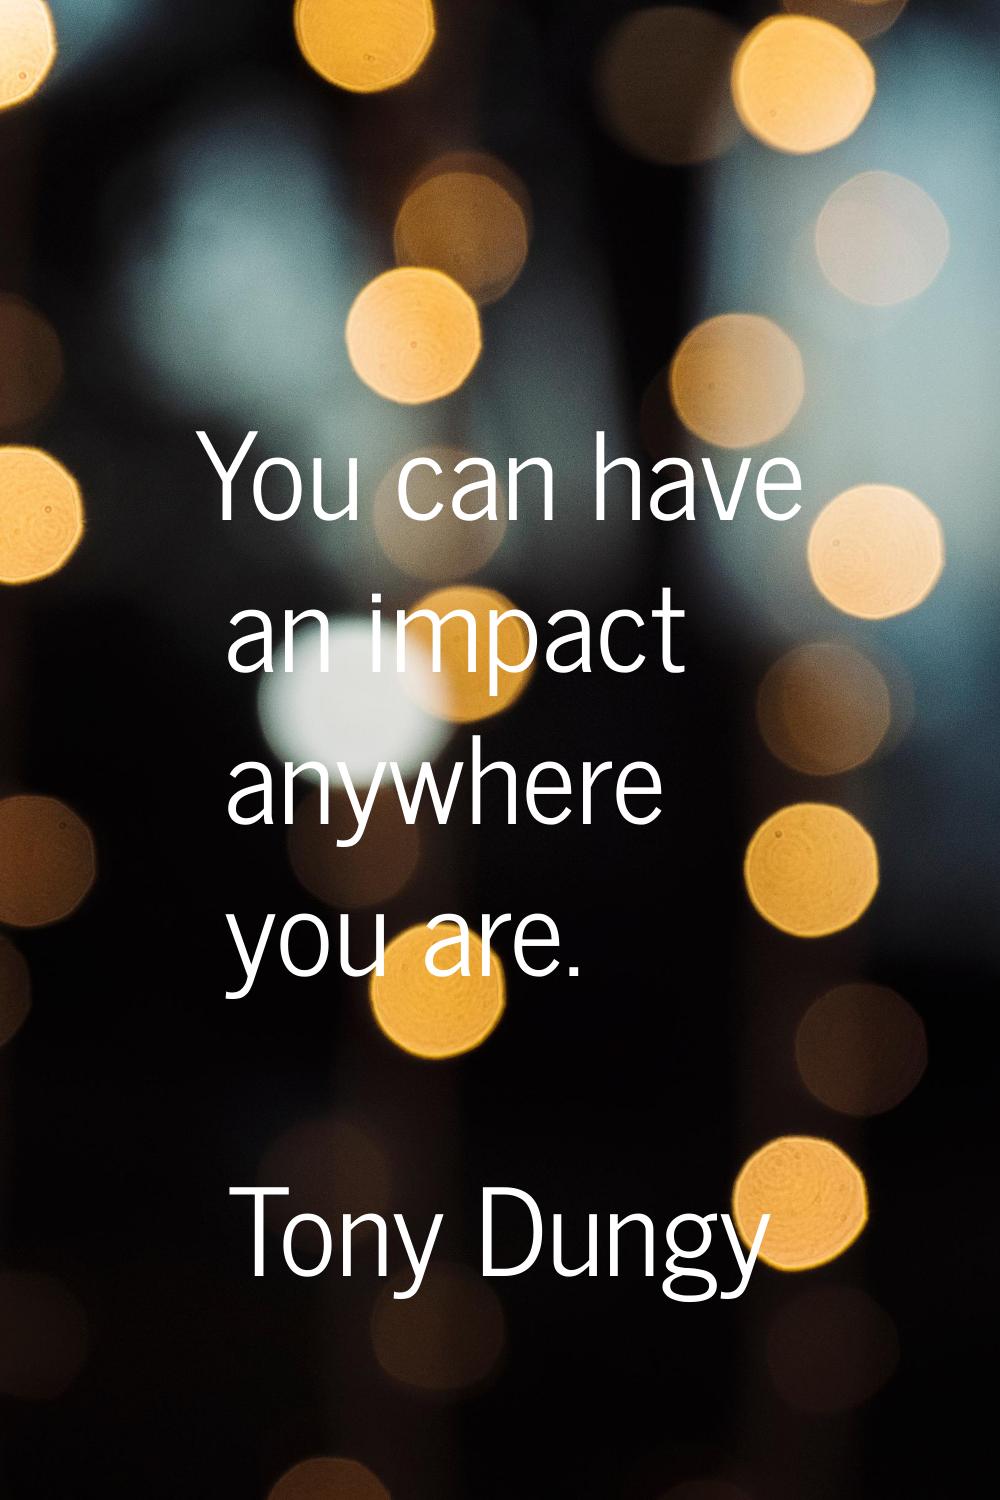 You can have an impact anywhere you are.